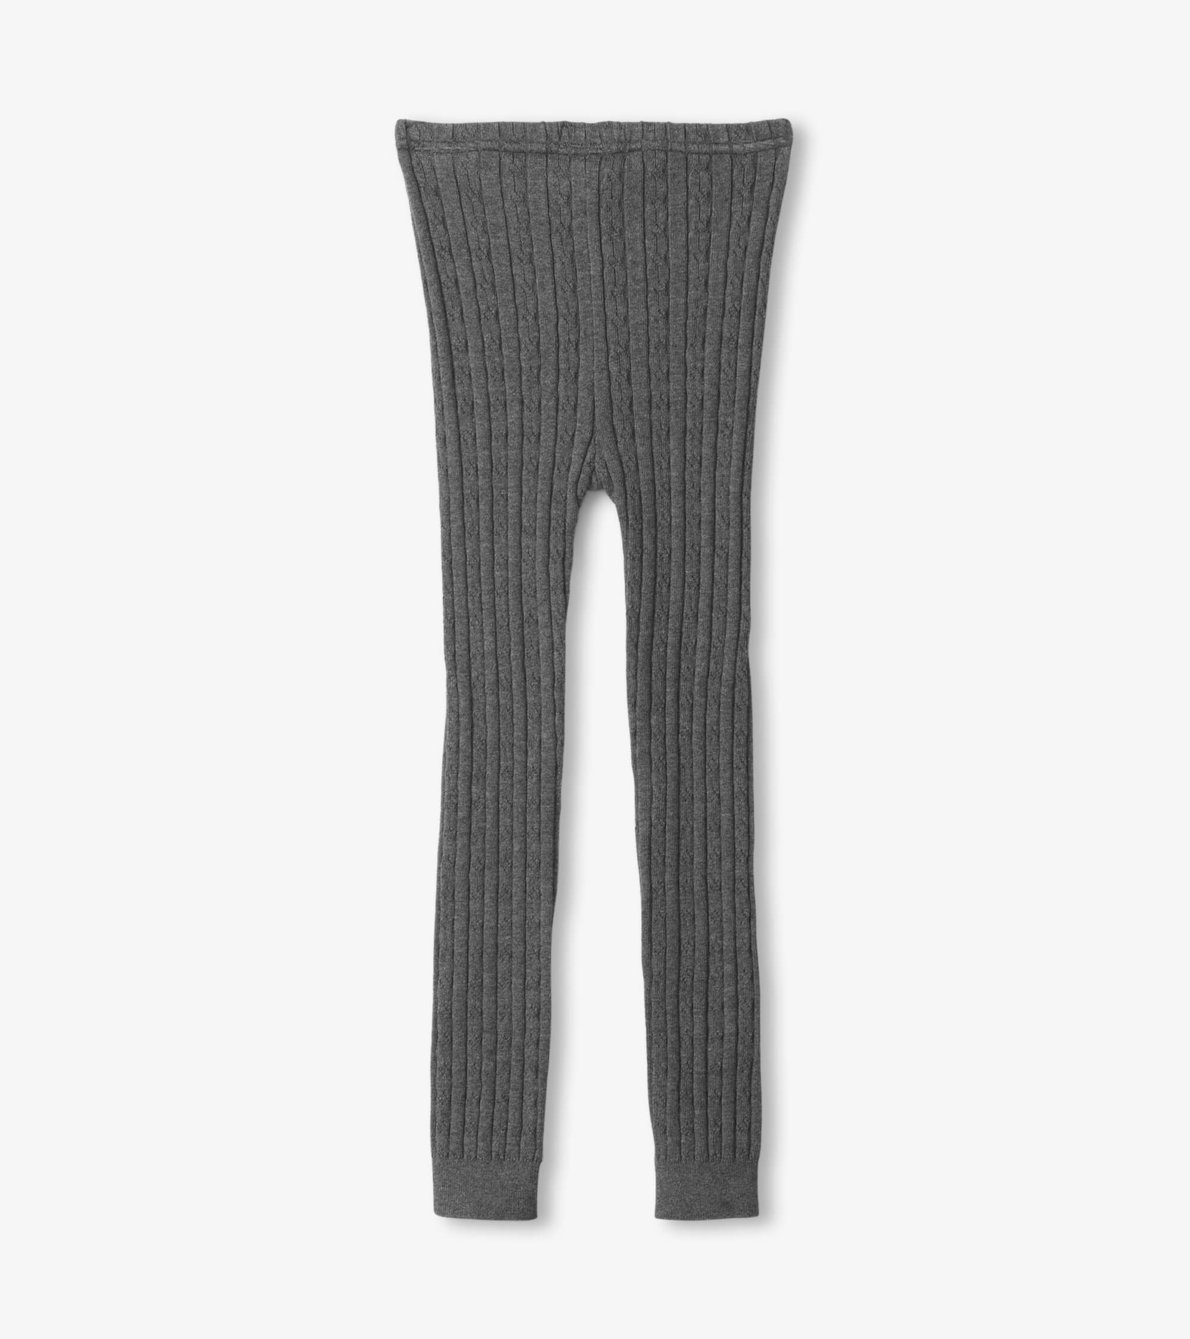 View larger image of Girls Charcoal Cable Knit Tights